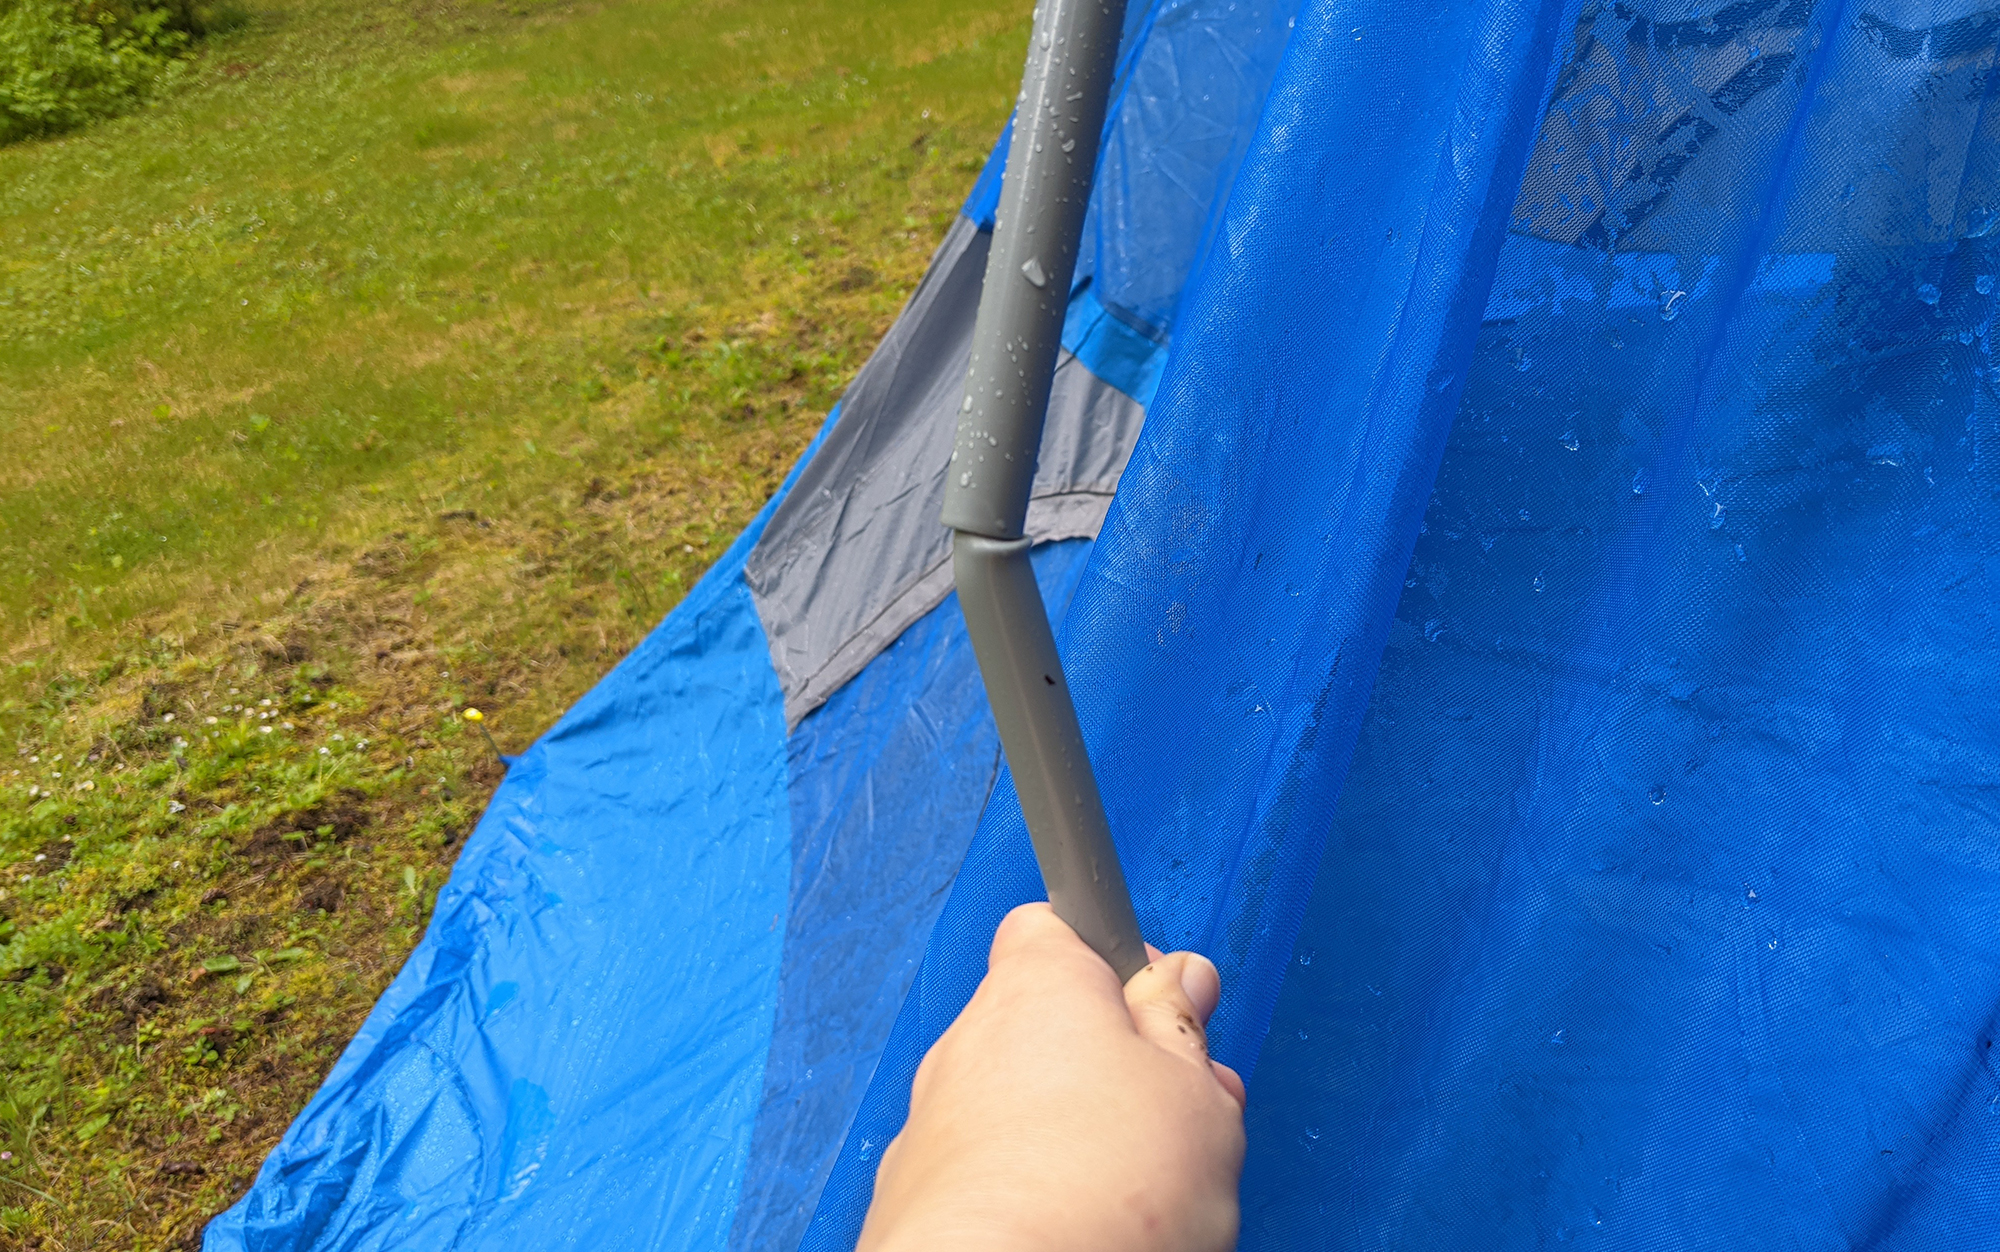 The Eddie Bauer 10-person tent had a pole break during setup.